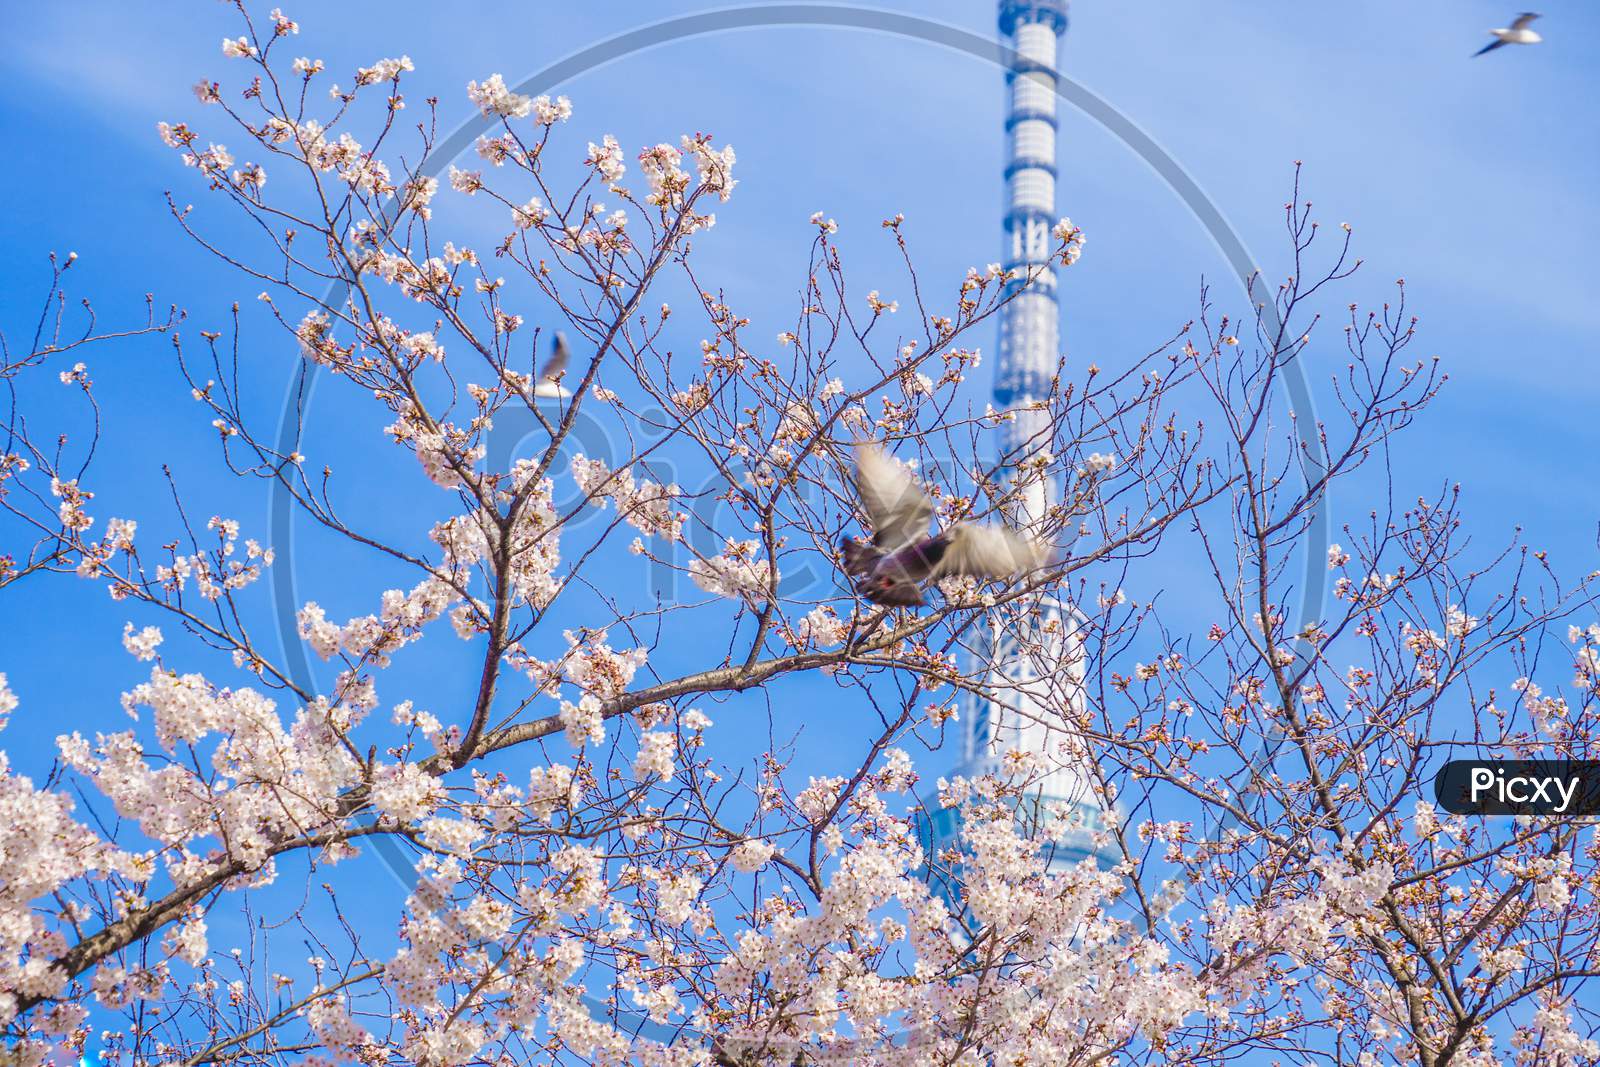 Sky Tree And Cherry Blossoms And Pigeons